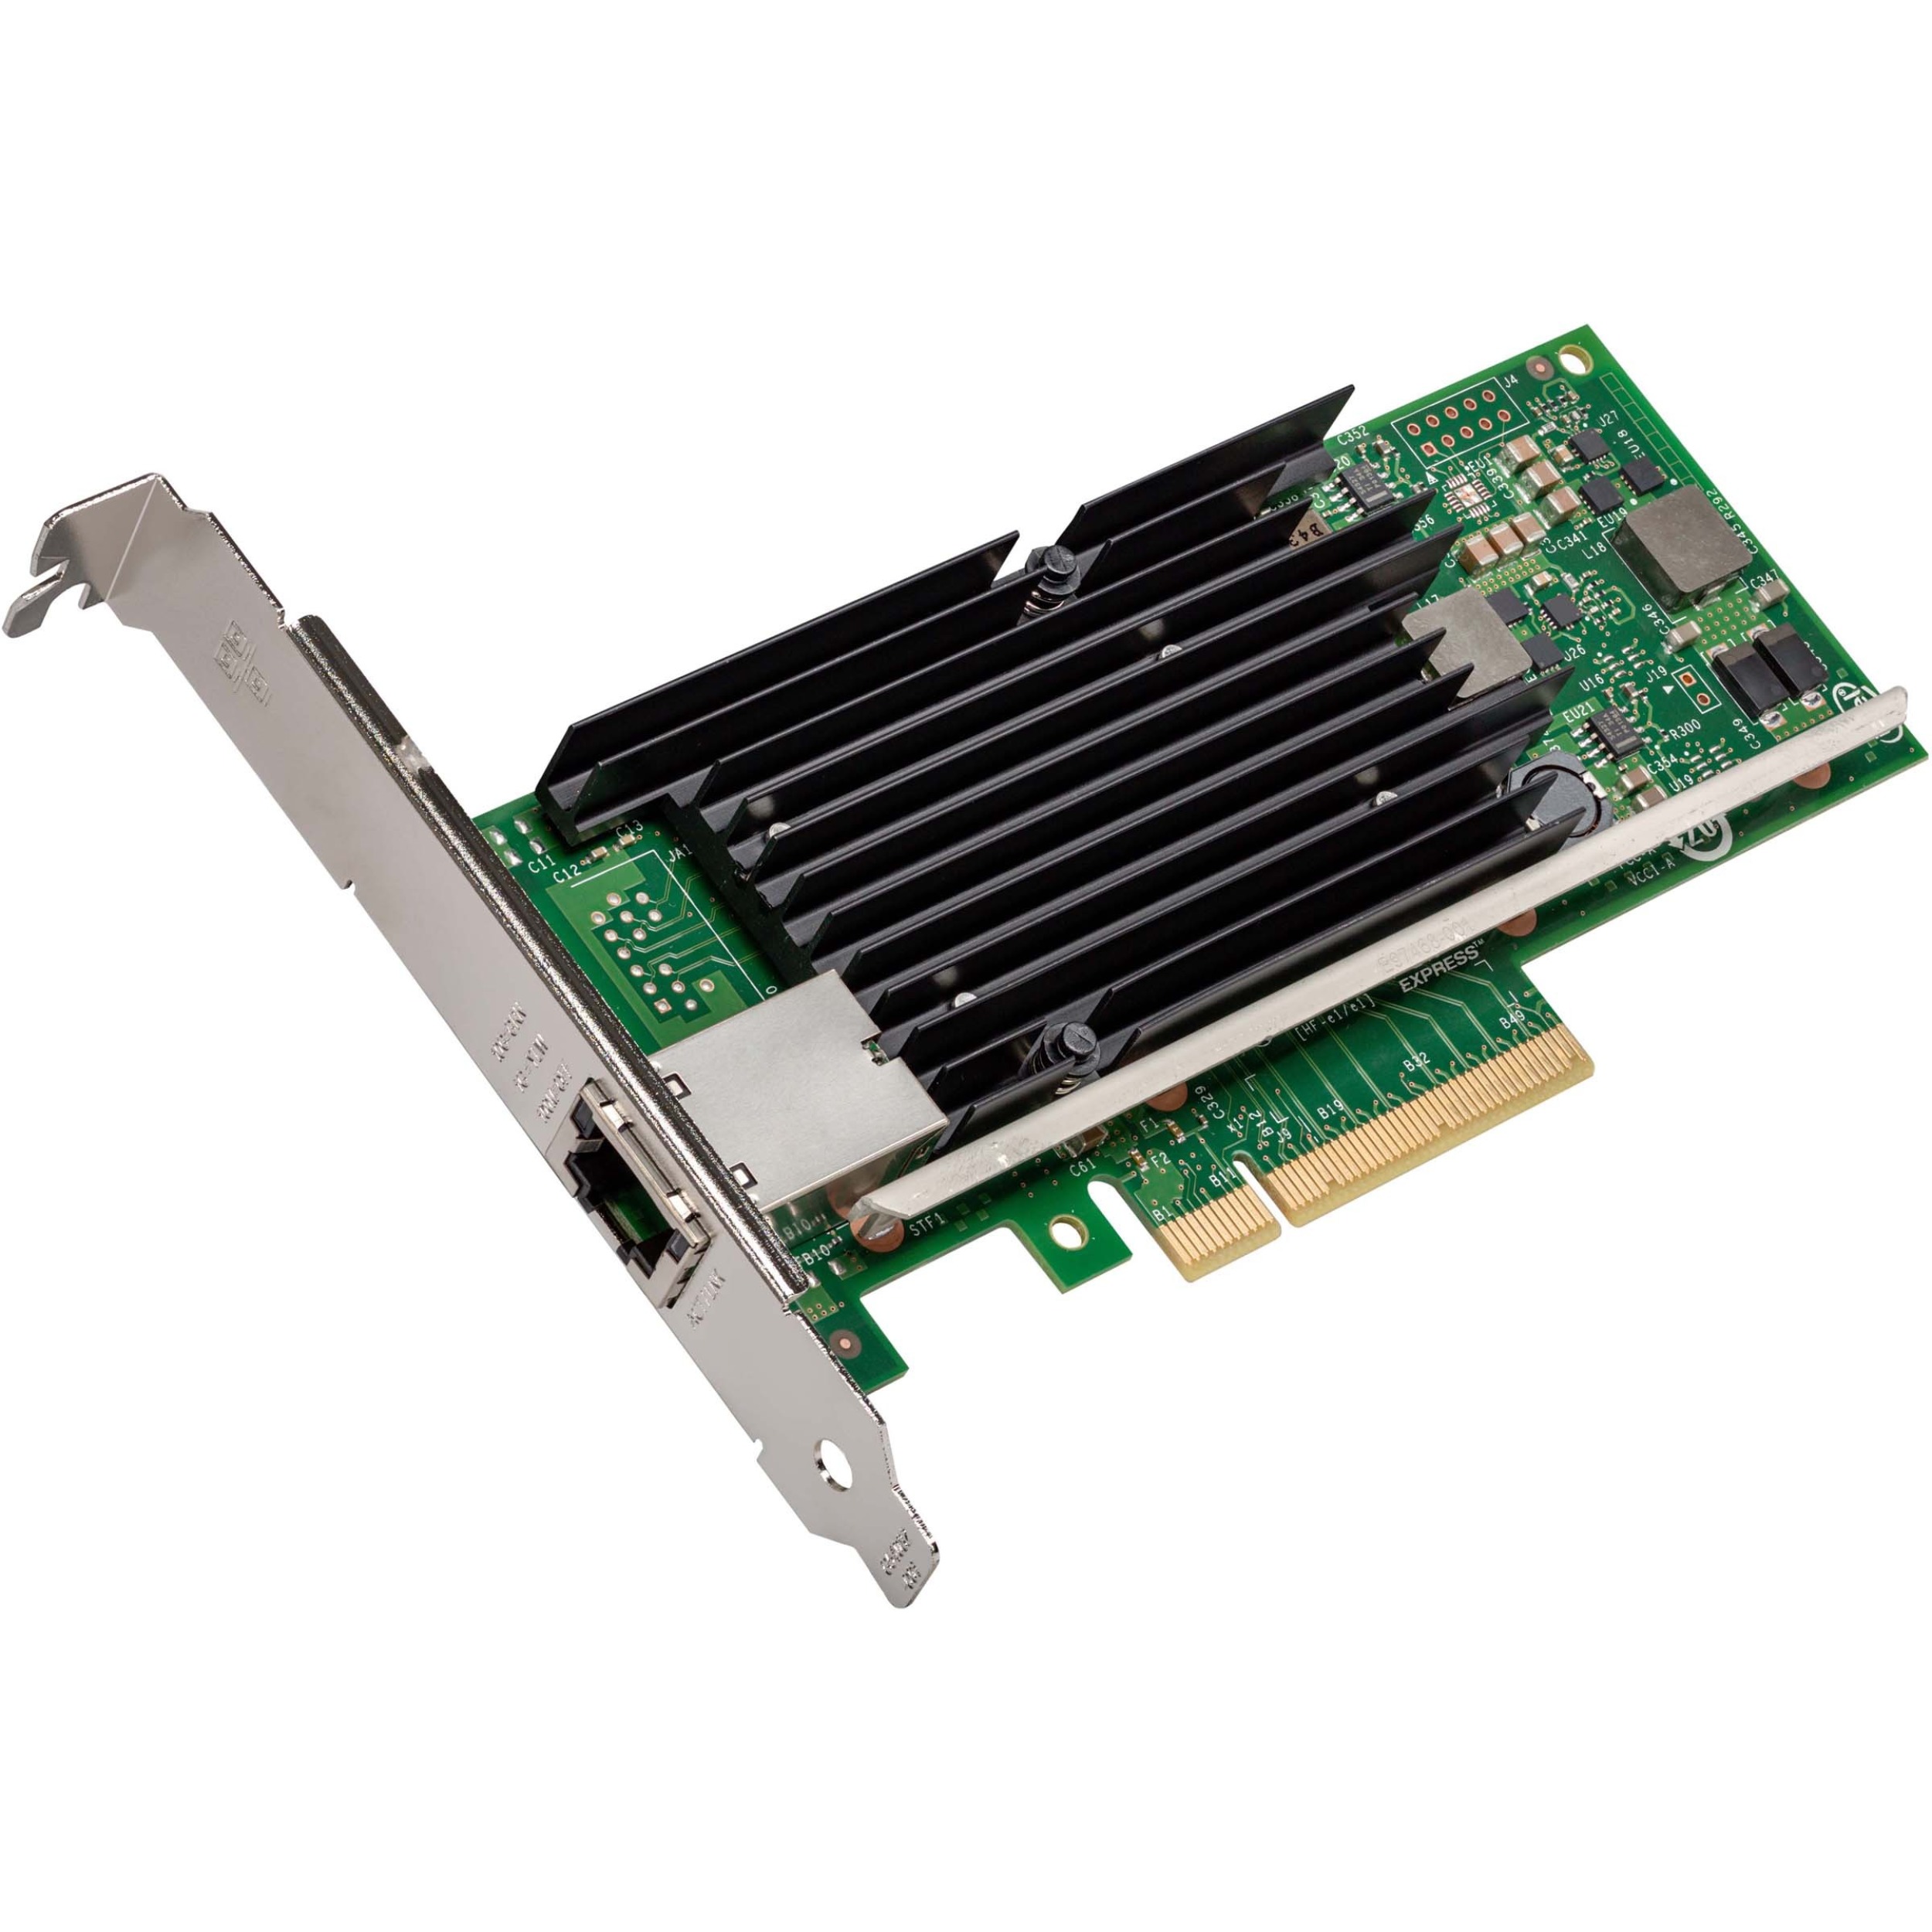 Intel Ethernet Converged Network Adapter X540-T1 - network adapter - image 2 of 2